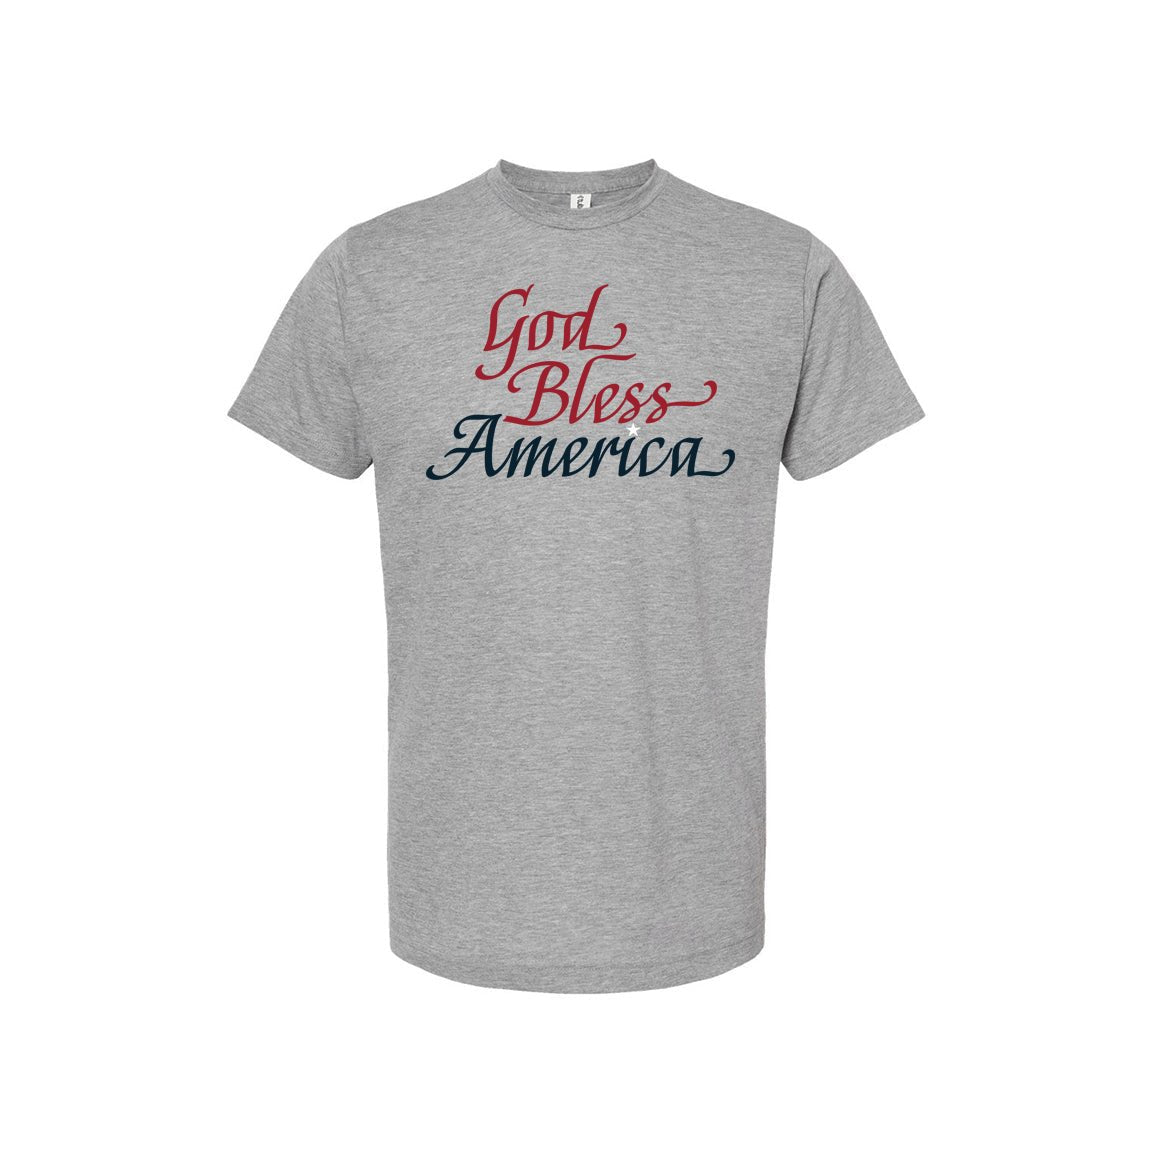 God Bless America T-Shirt - We The People Bible